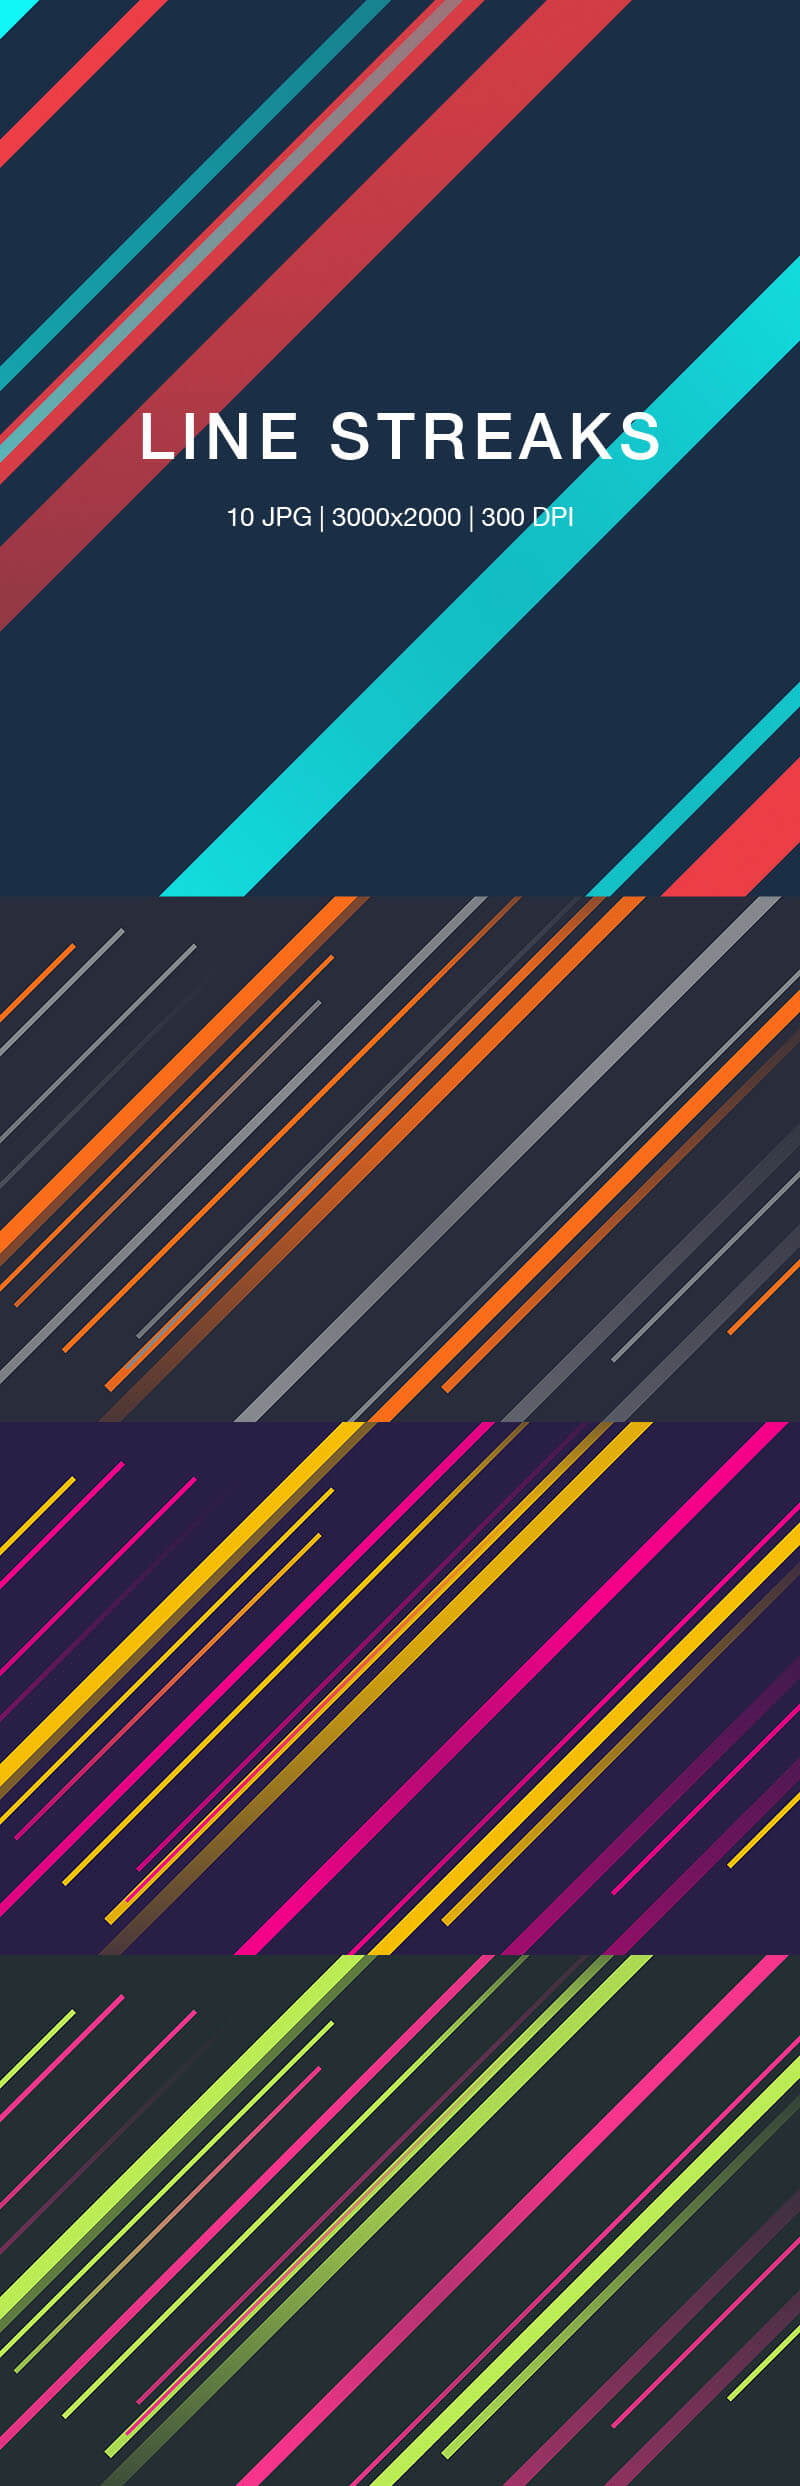 Line Streaks Backgrounds Preview